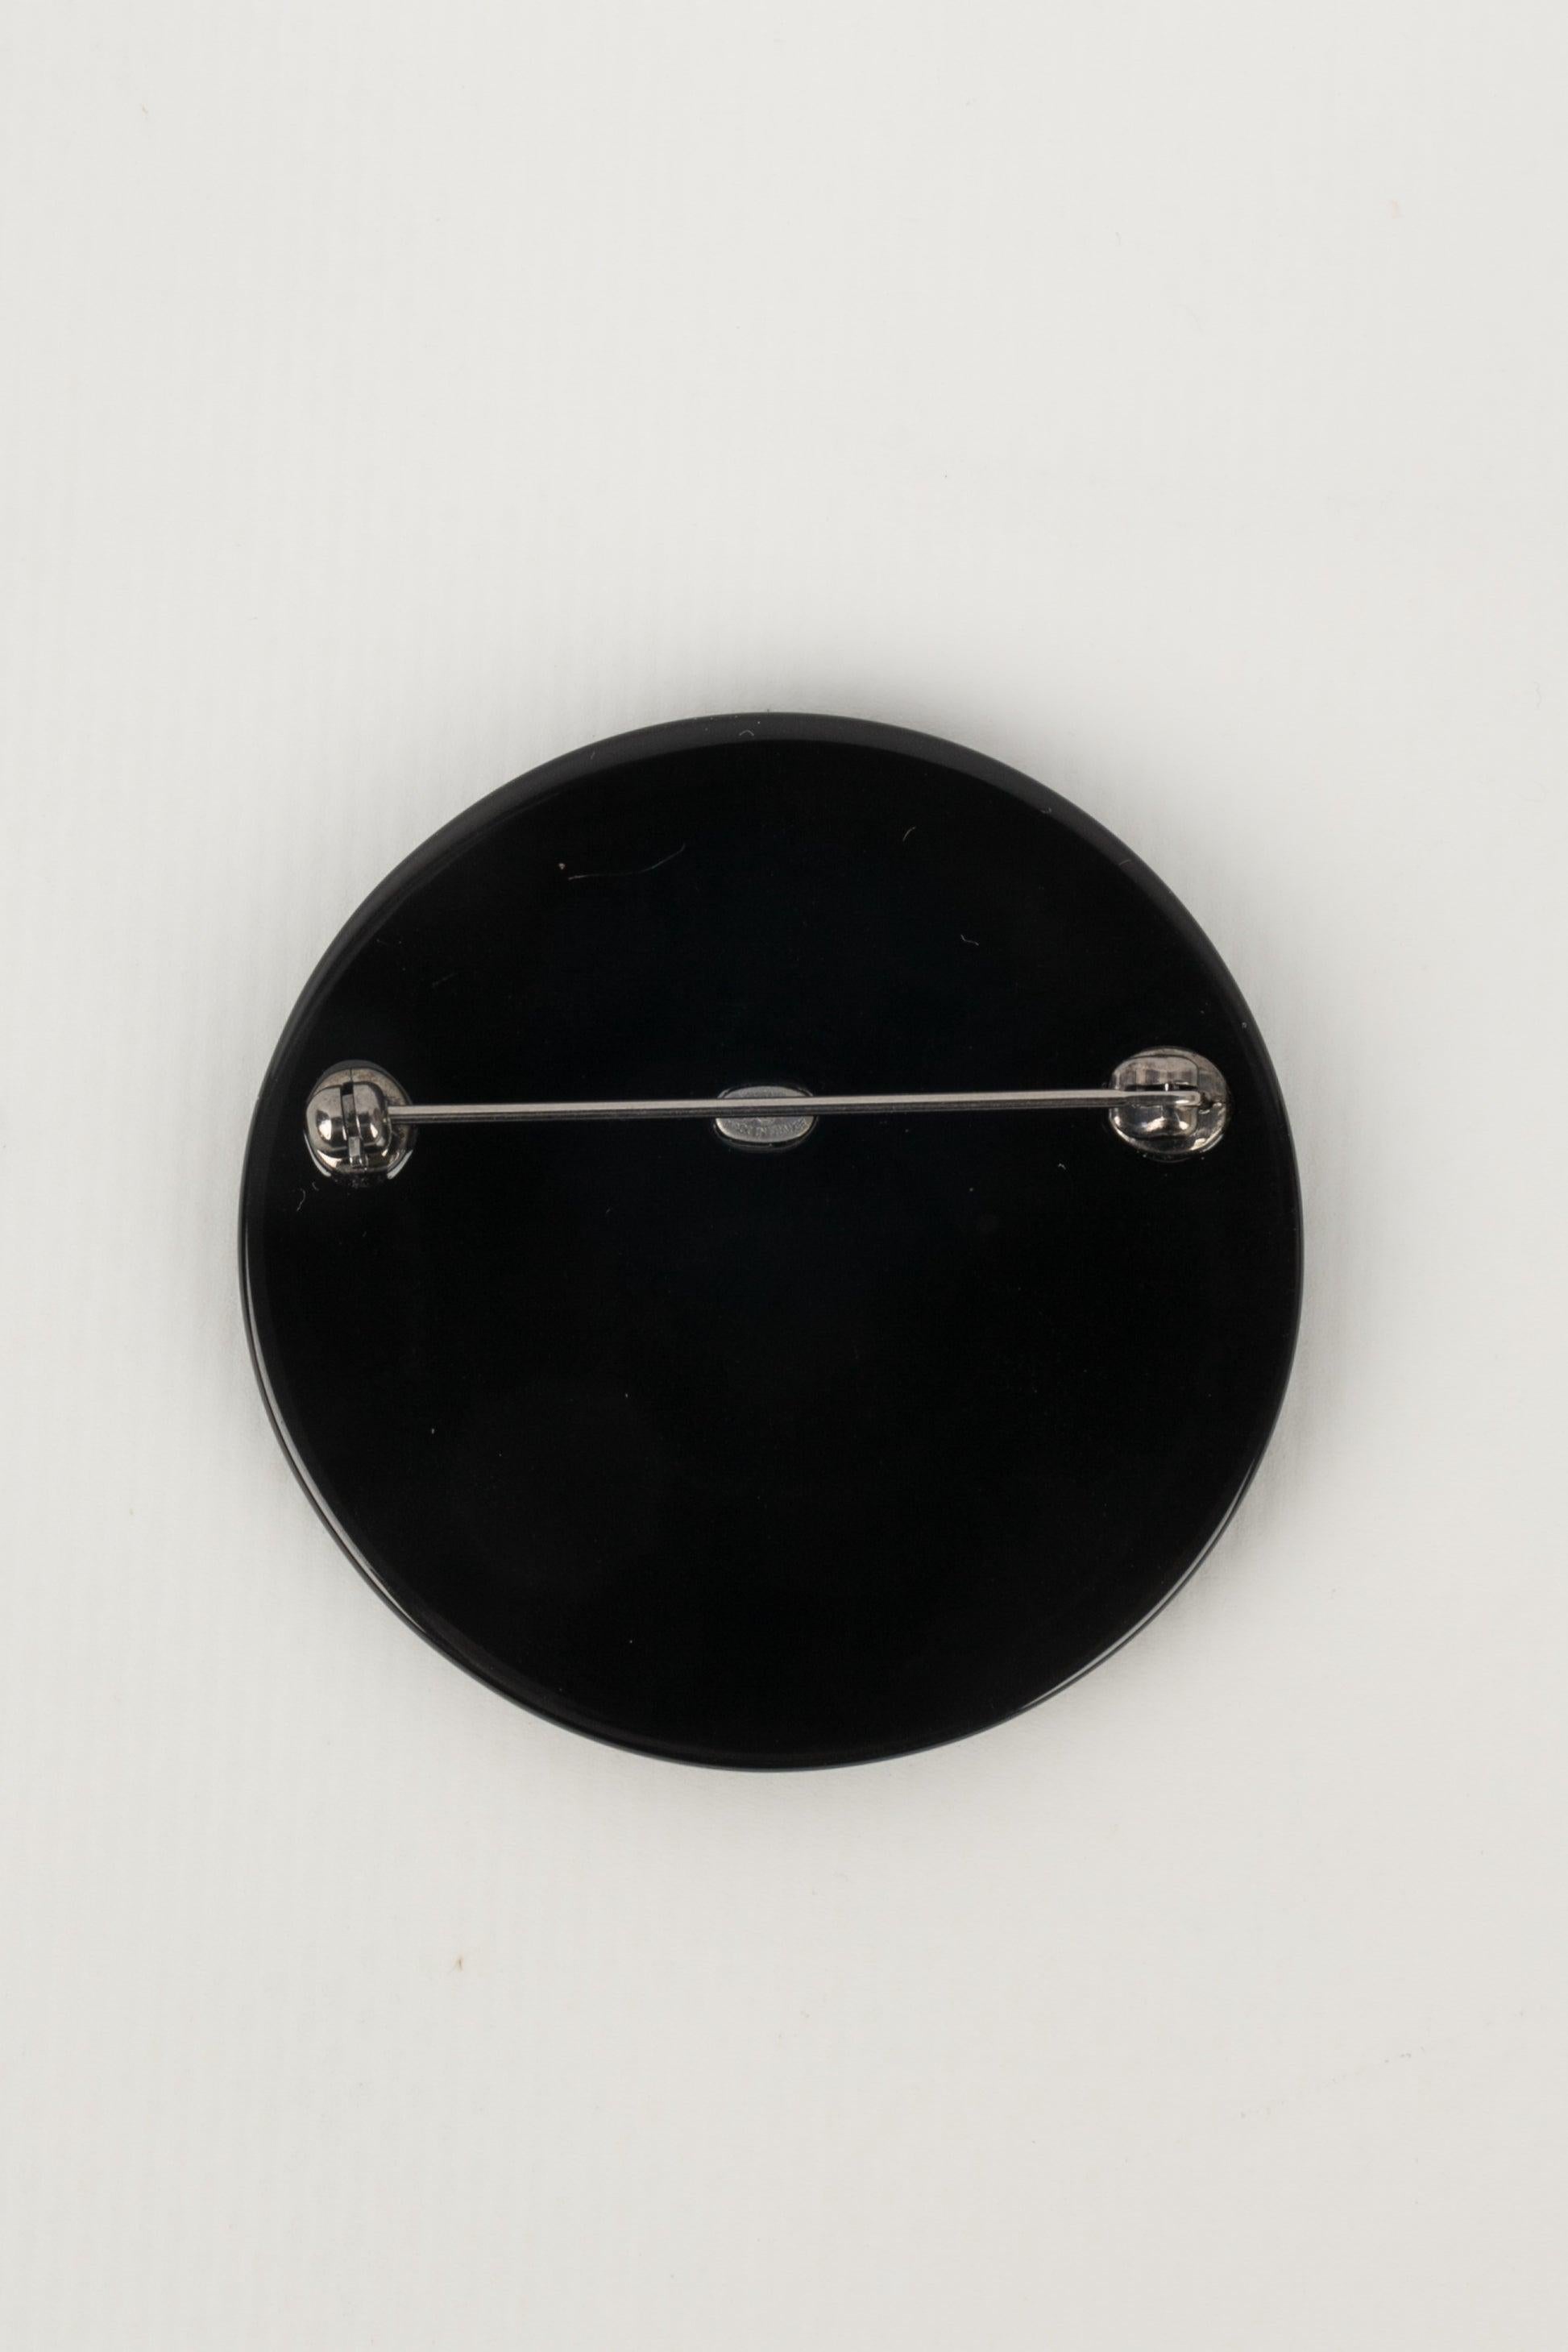 Chanel - (Made in France) Bakelite brooch bearing the effigy of Coco Chanel. Spring-Summer 2003 Collection.

Additional information:
Condition: Very good condition
Dimensions: Diameter: 5 cm
Period: 21st Century

Seller Reference: BRB59